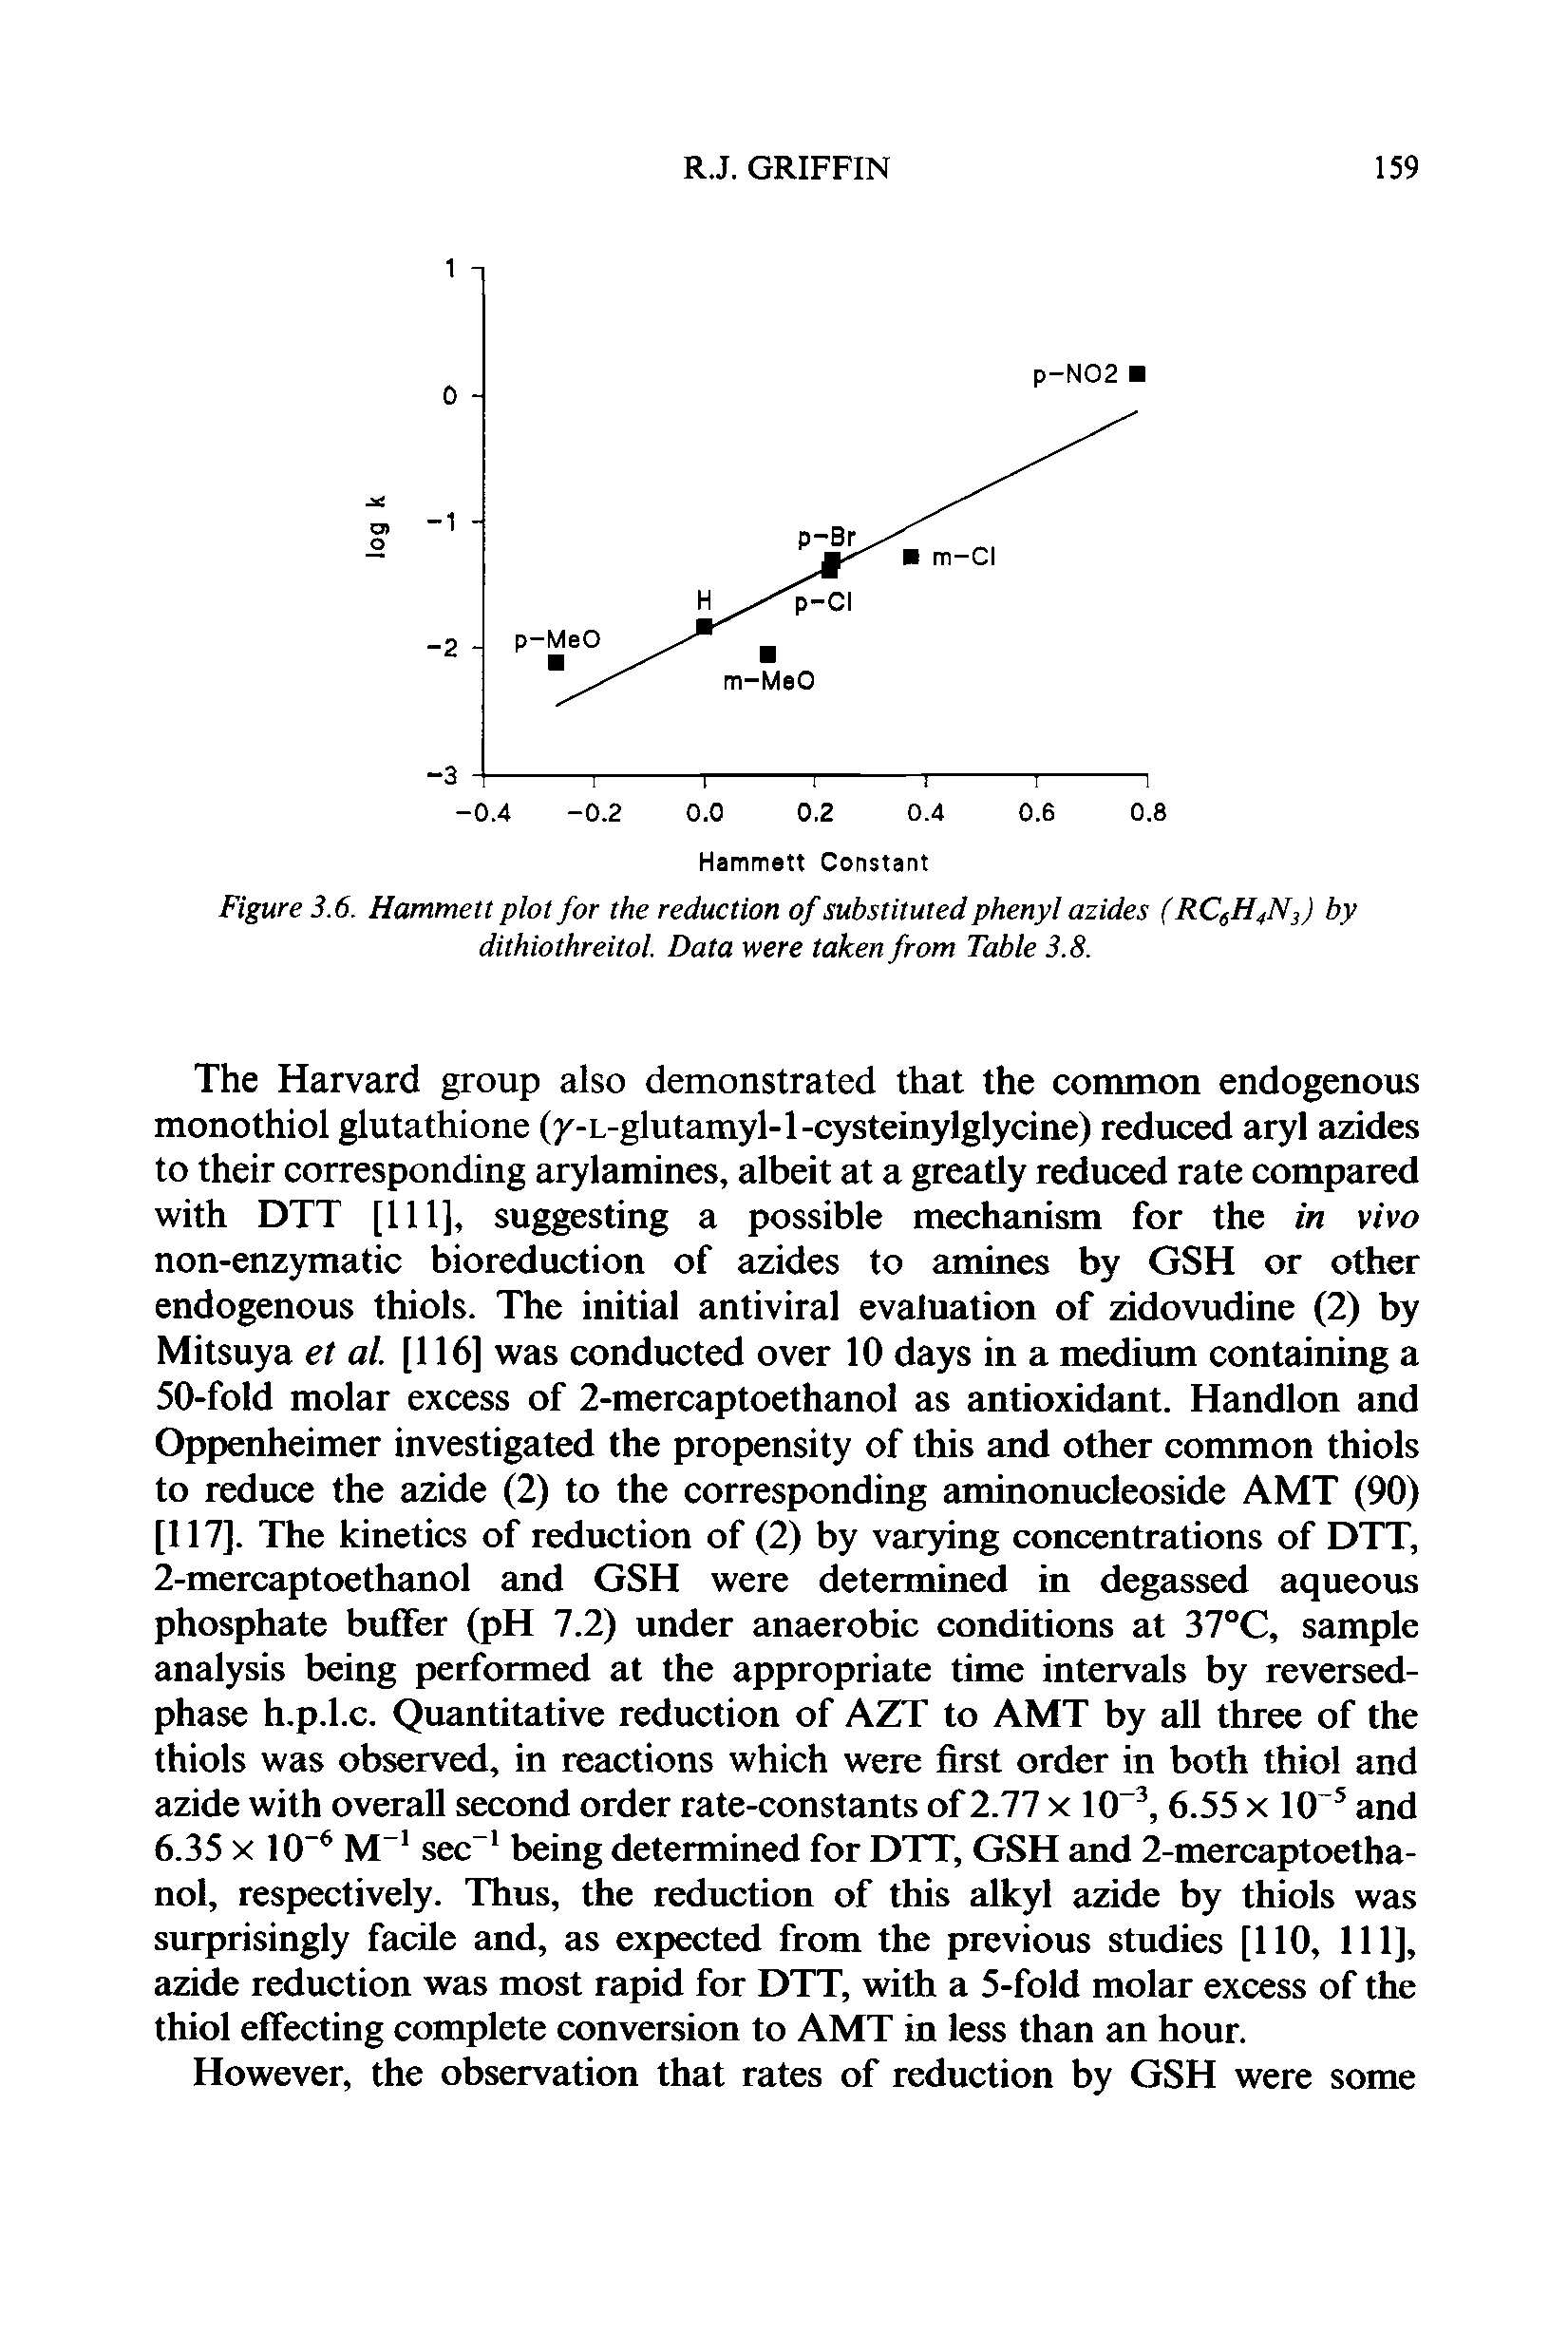 Figure 3.6. Hammett plot for the reduction of substituted phenyl azides (RCfH4Nf by dithiothreitol. Data were taken from Table 3.8.